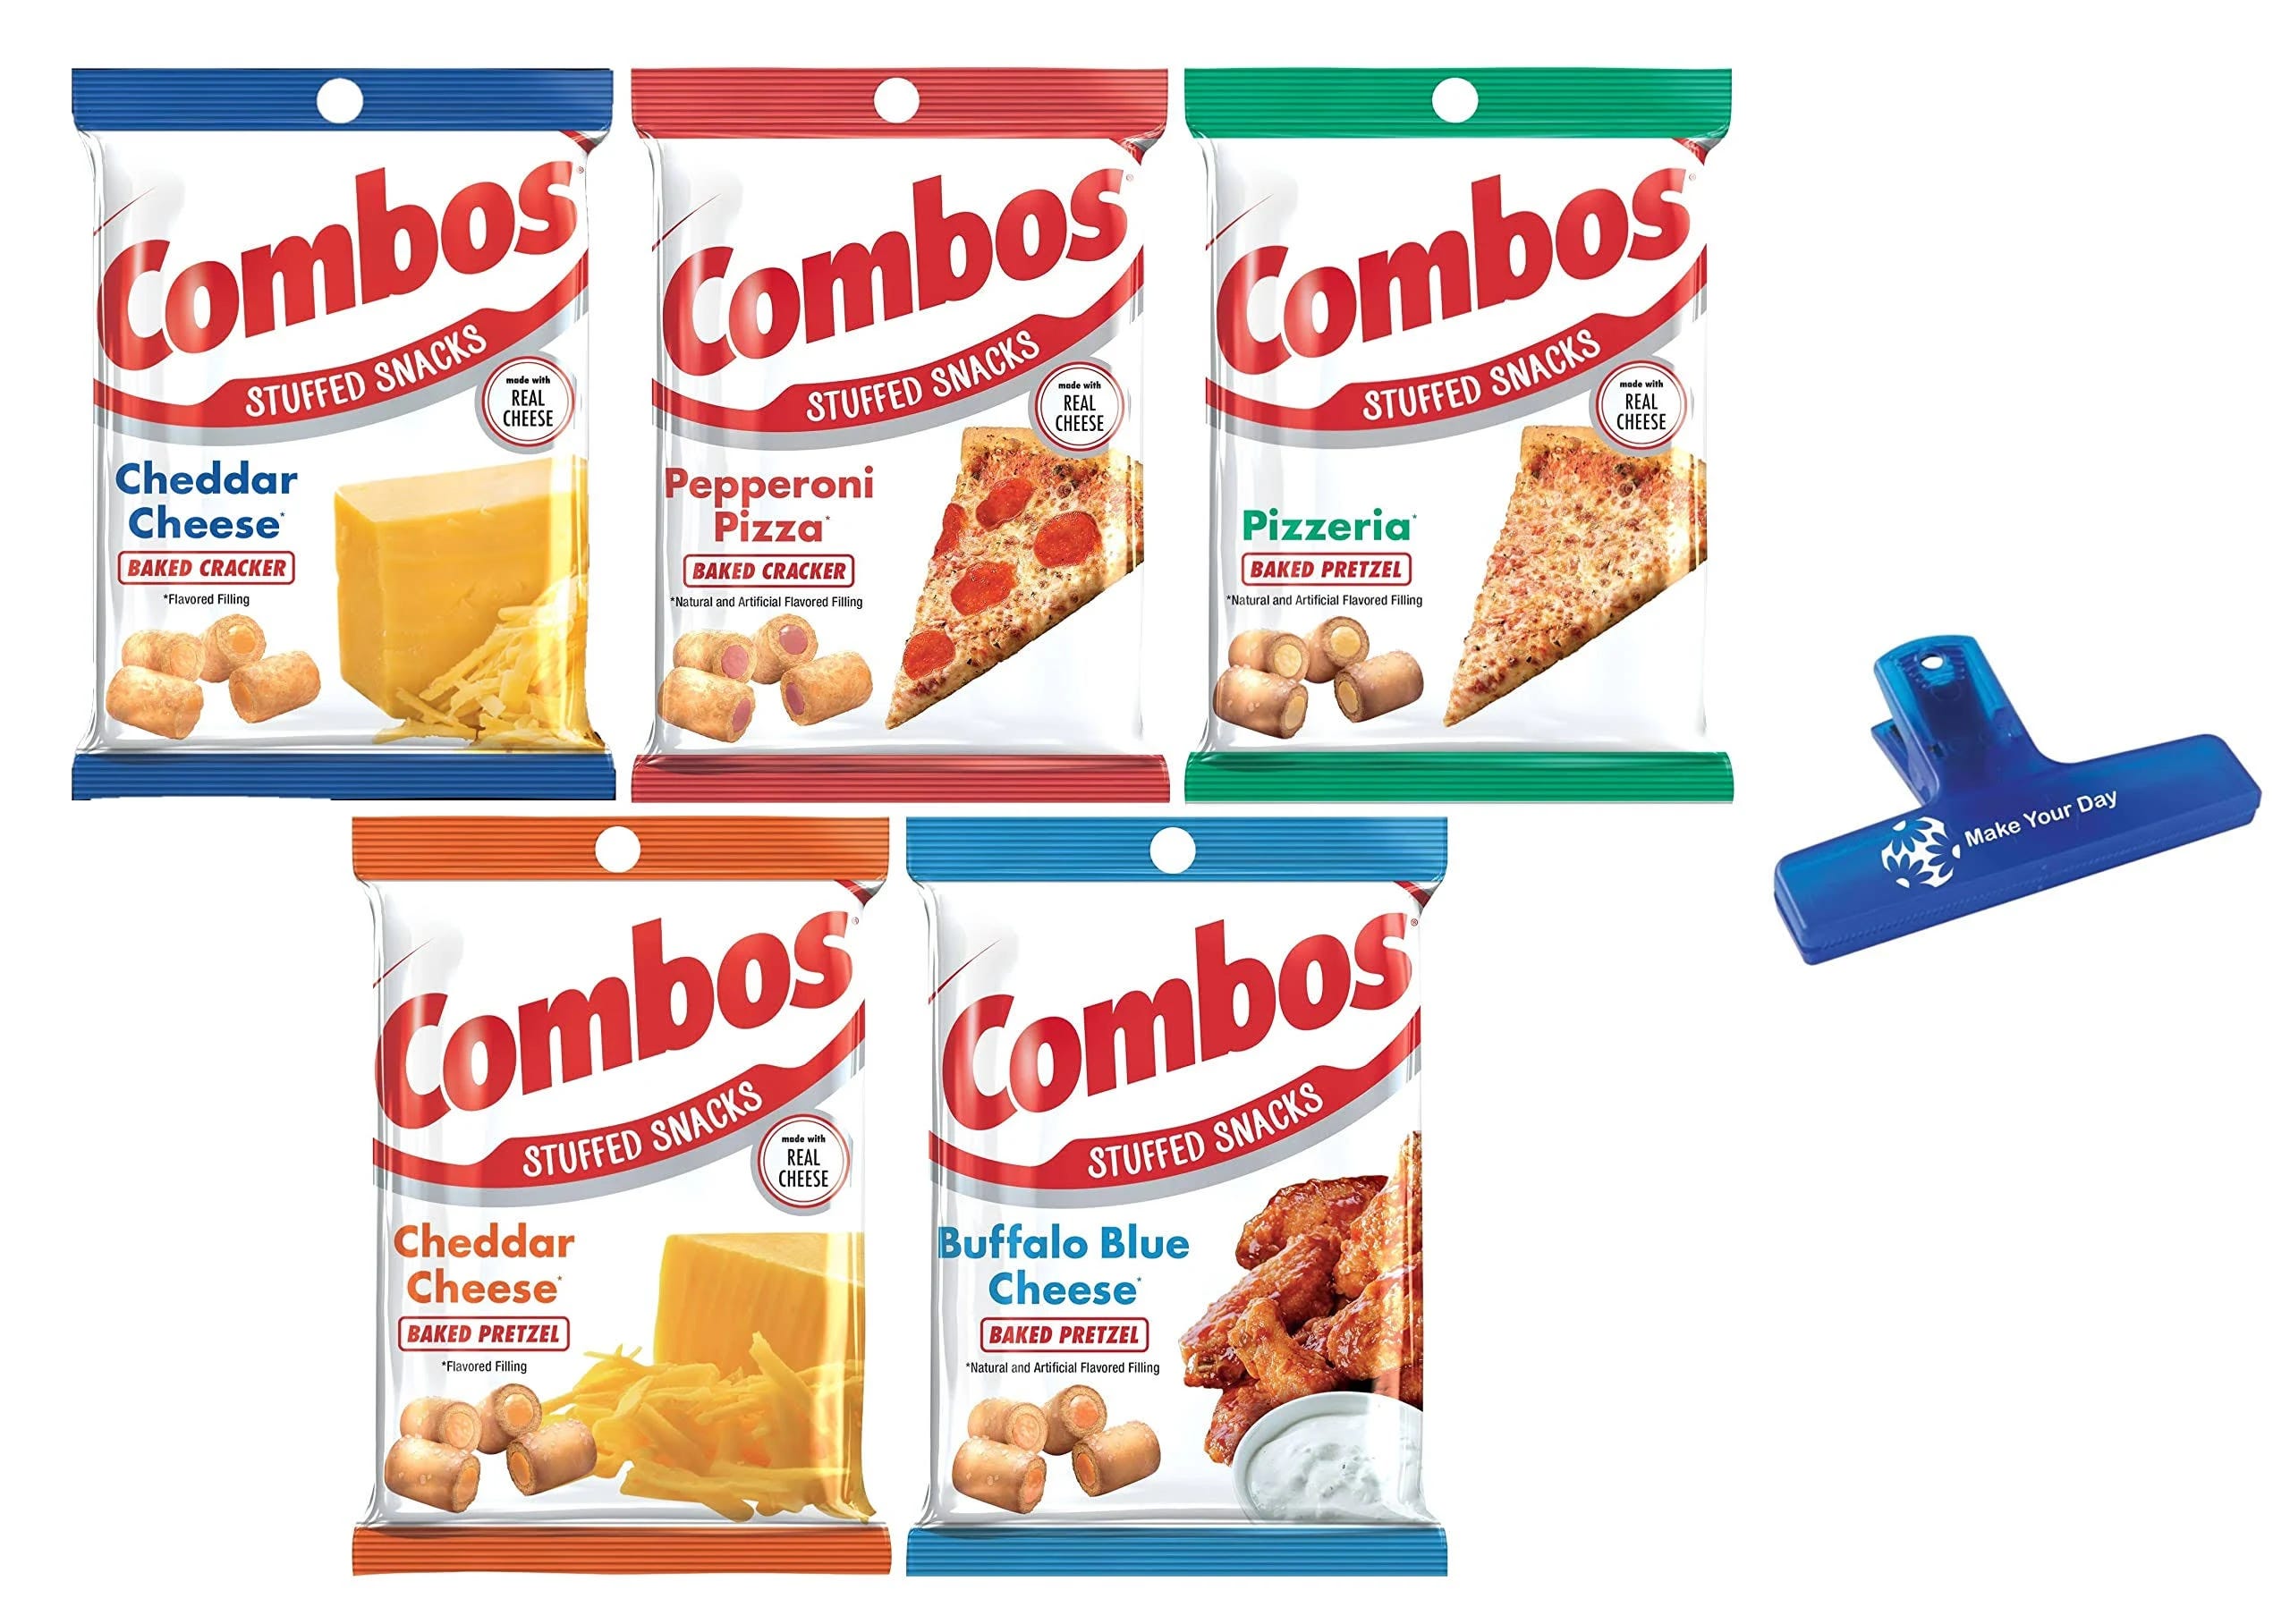 Make Your Day - Combos Cheese Pepperoni Pizza and Cheddar Cheese Pretzel Box | Image